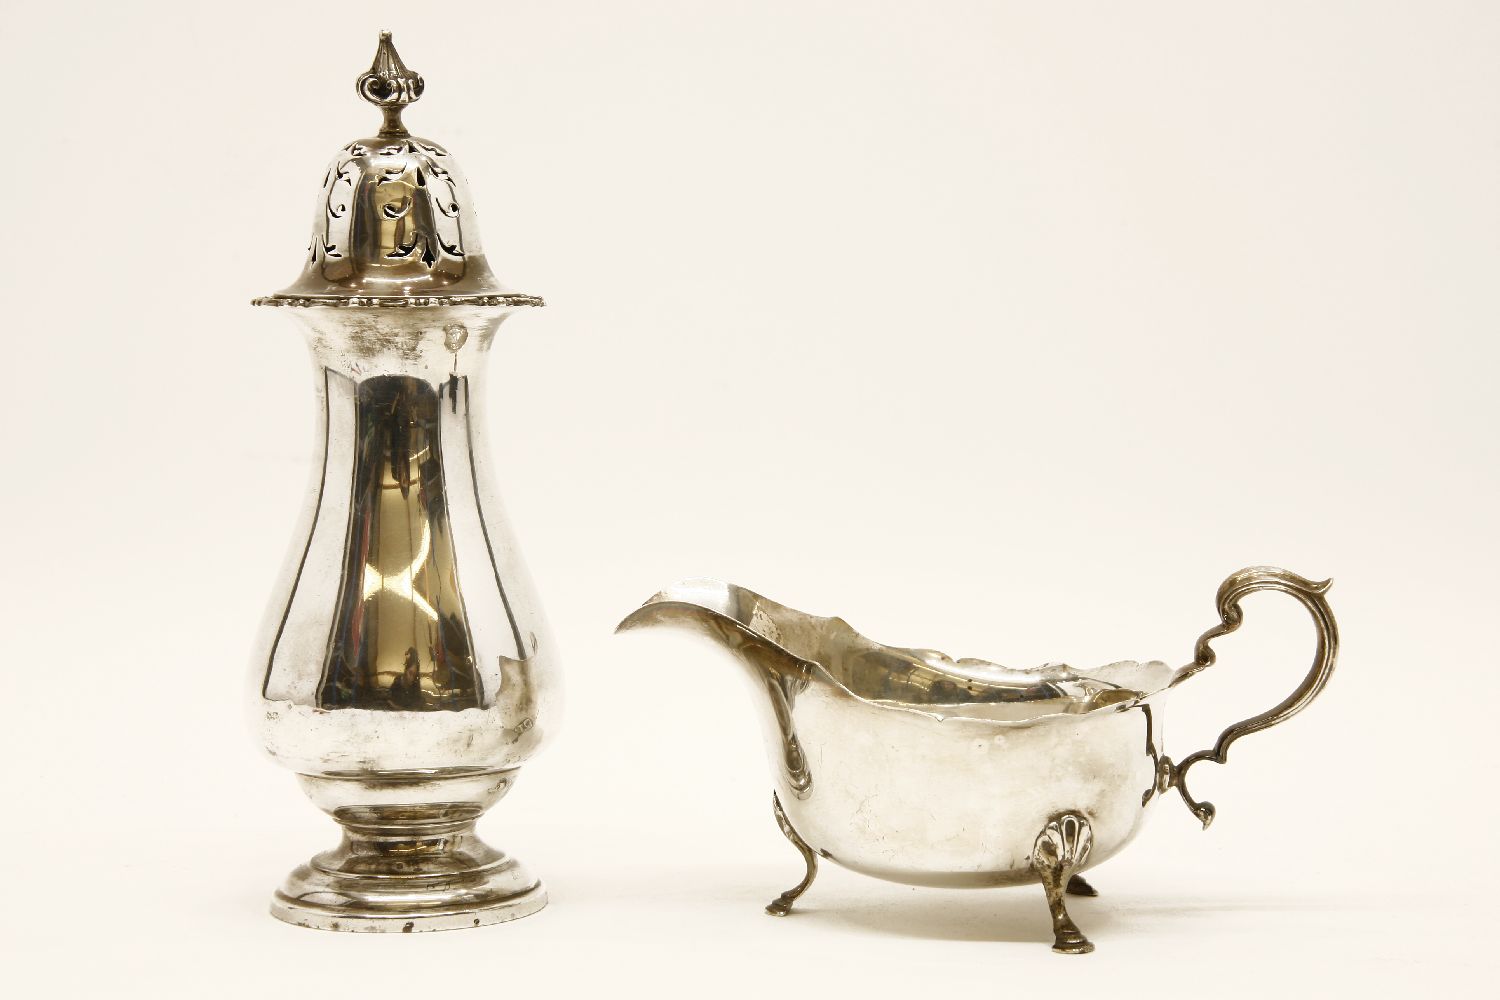 A Mappin & Webb silver sugar caster, and a silver sauce boat